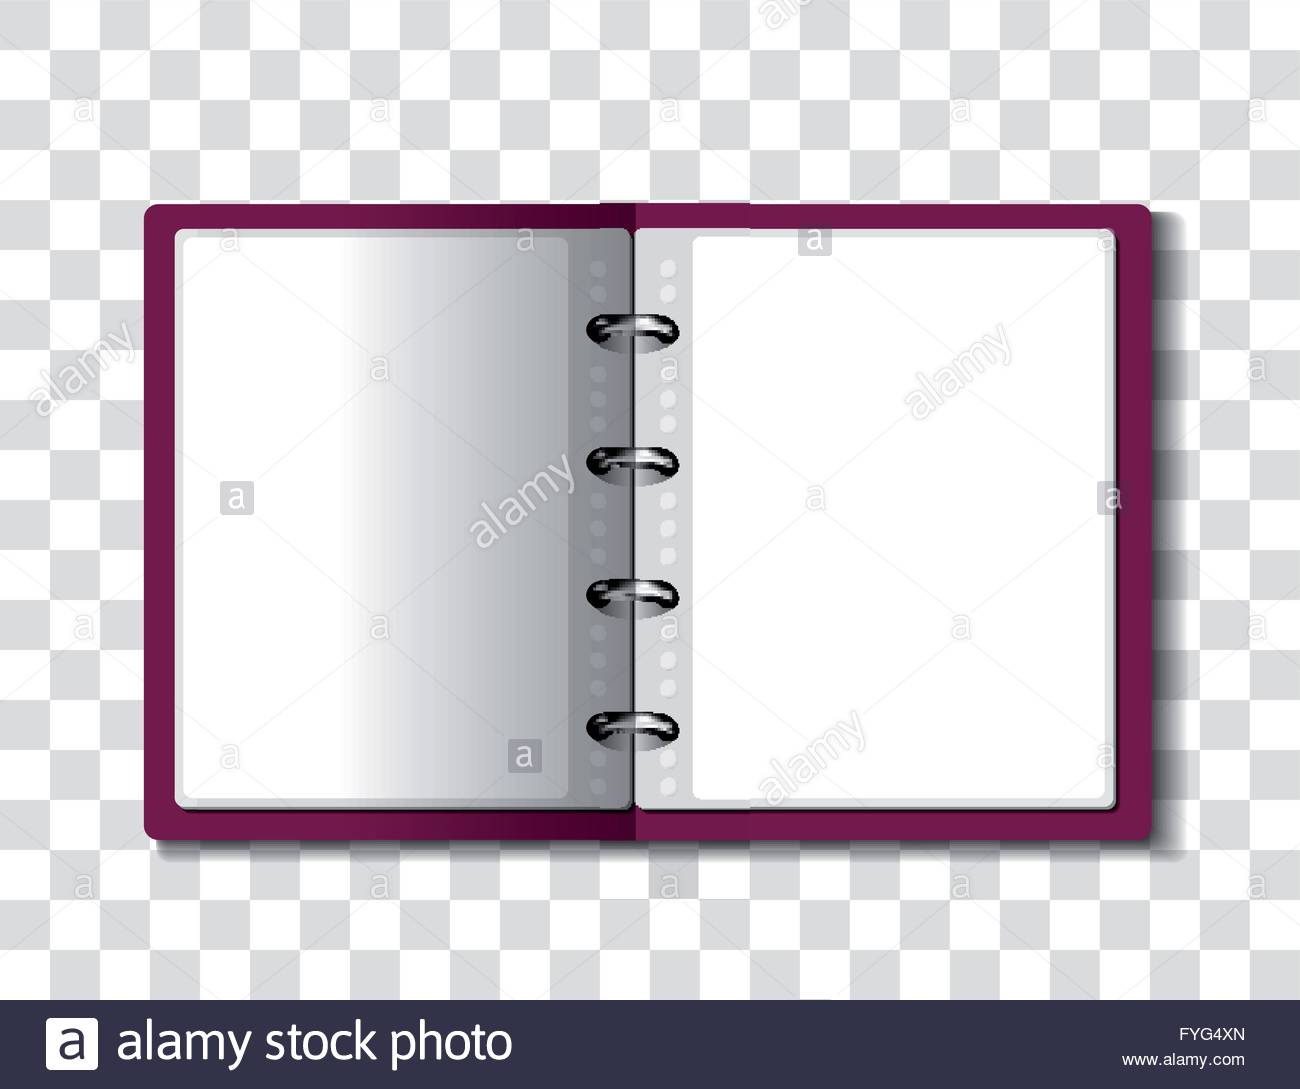 Red Ring Binder Folder On Checkered Background Stock Vector Image